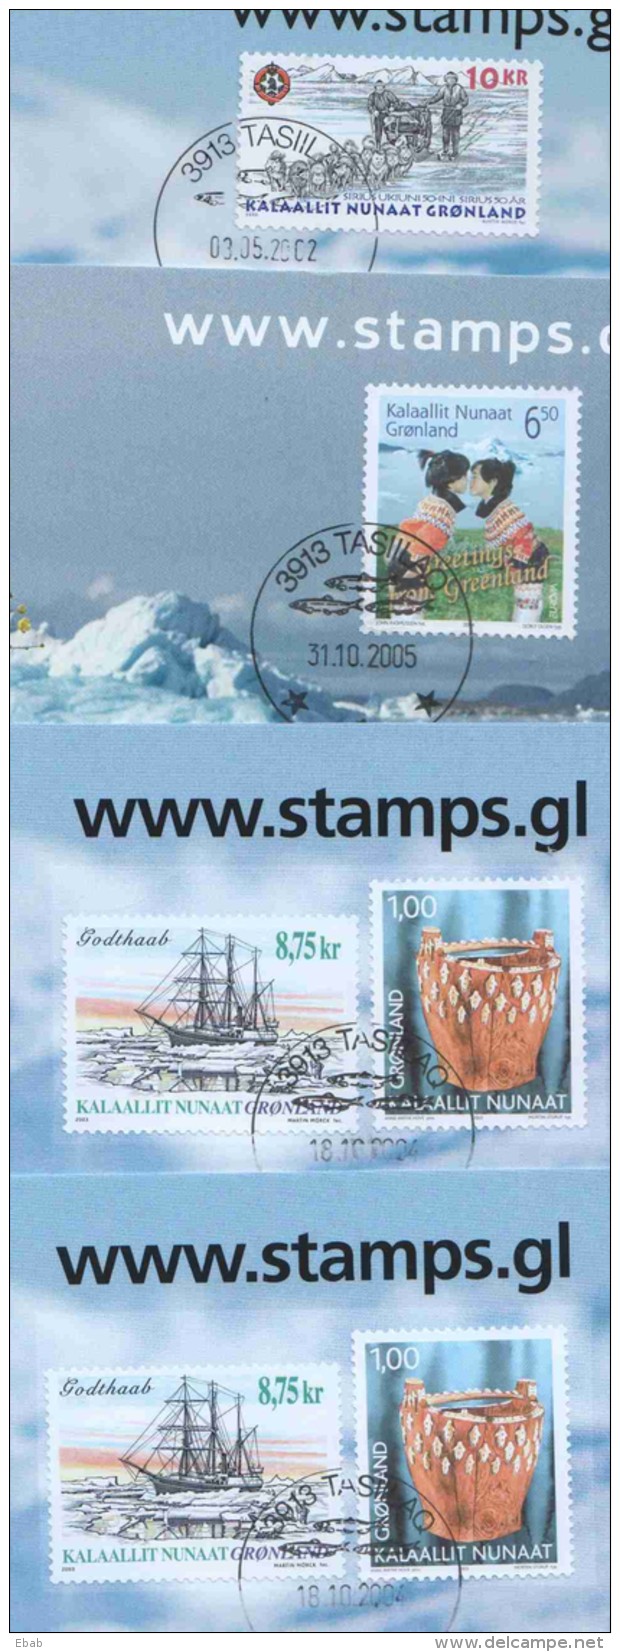 Danmark Gronland - various issues canceled on paper (Michel value over &euro; 60)1